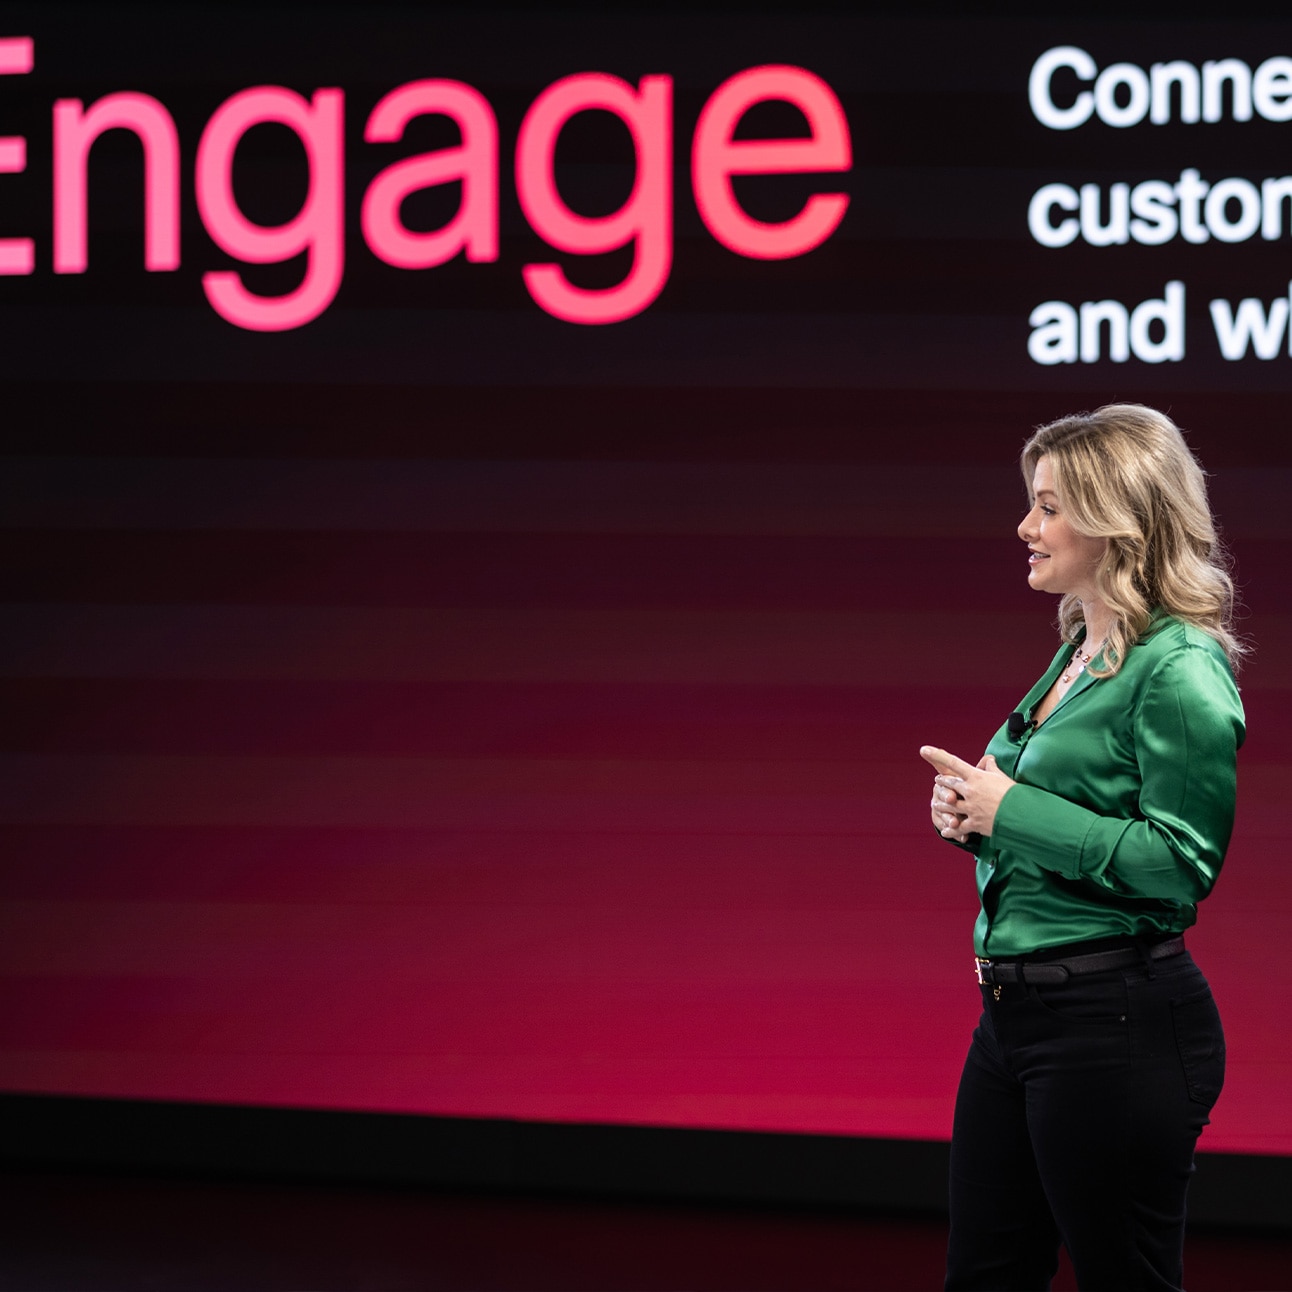 A smiling individual in a green shirt speaks onstage at WebexOne.